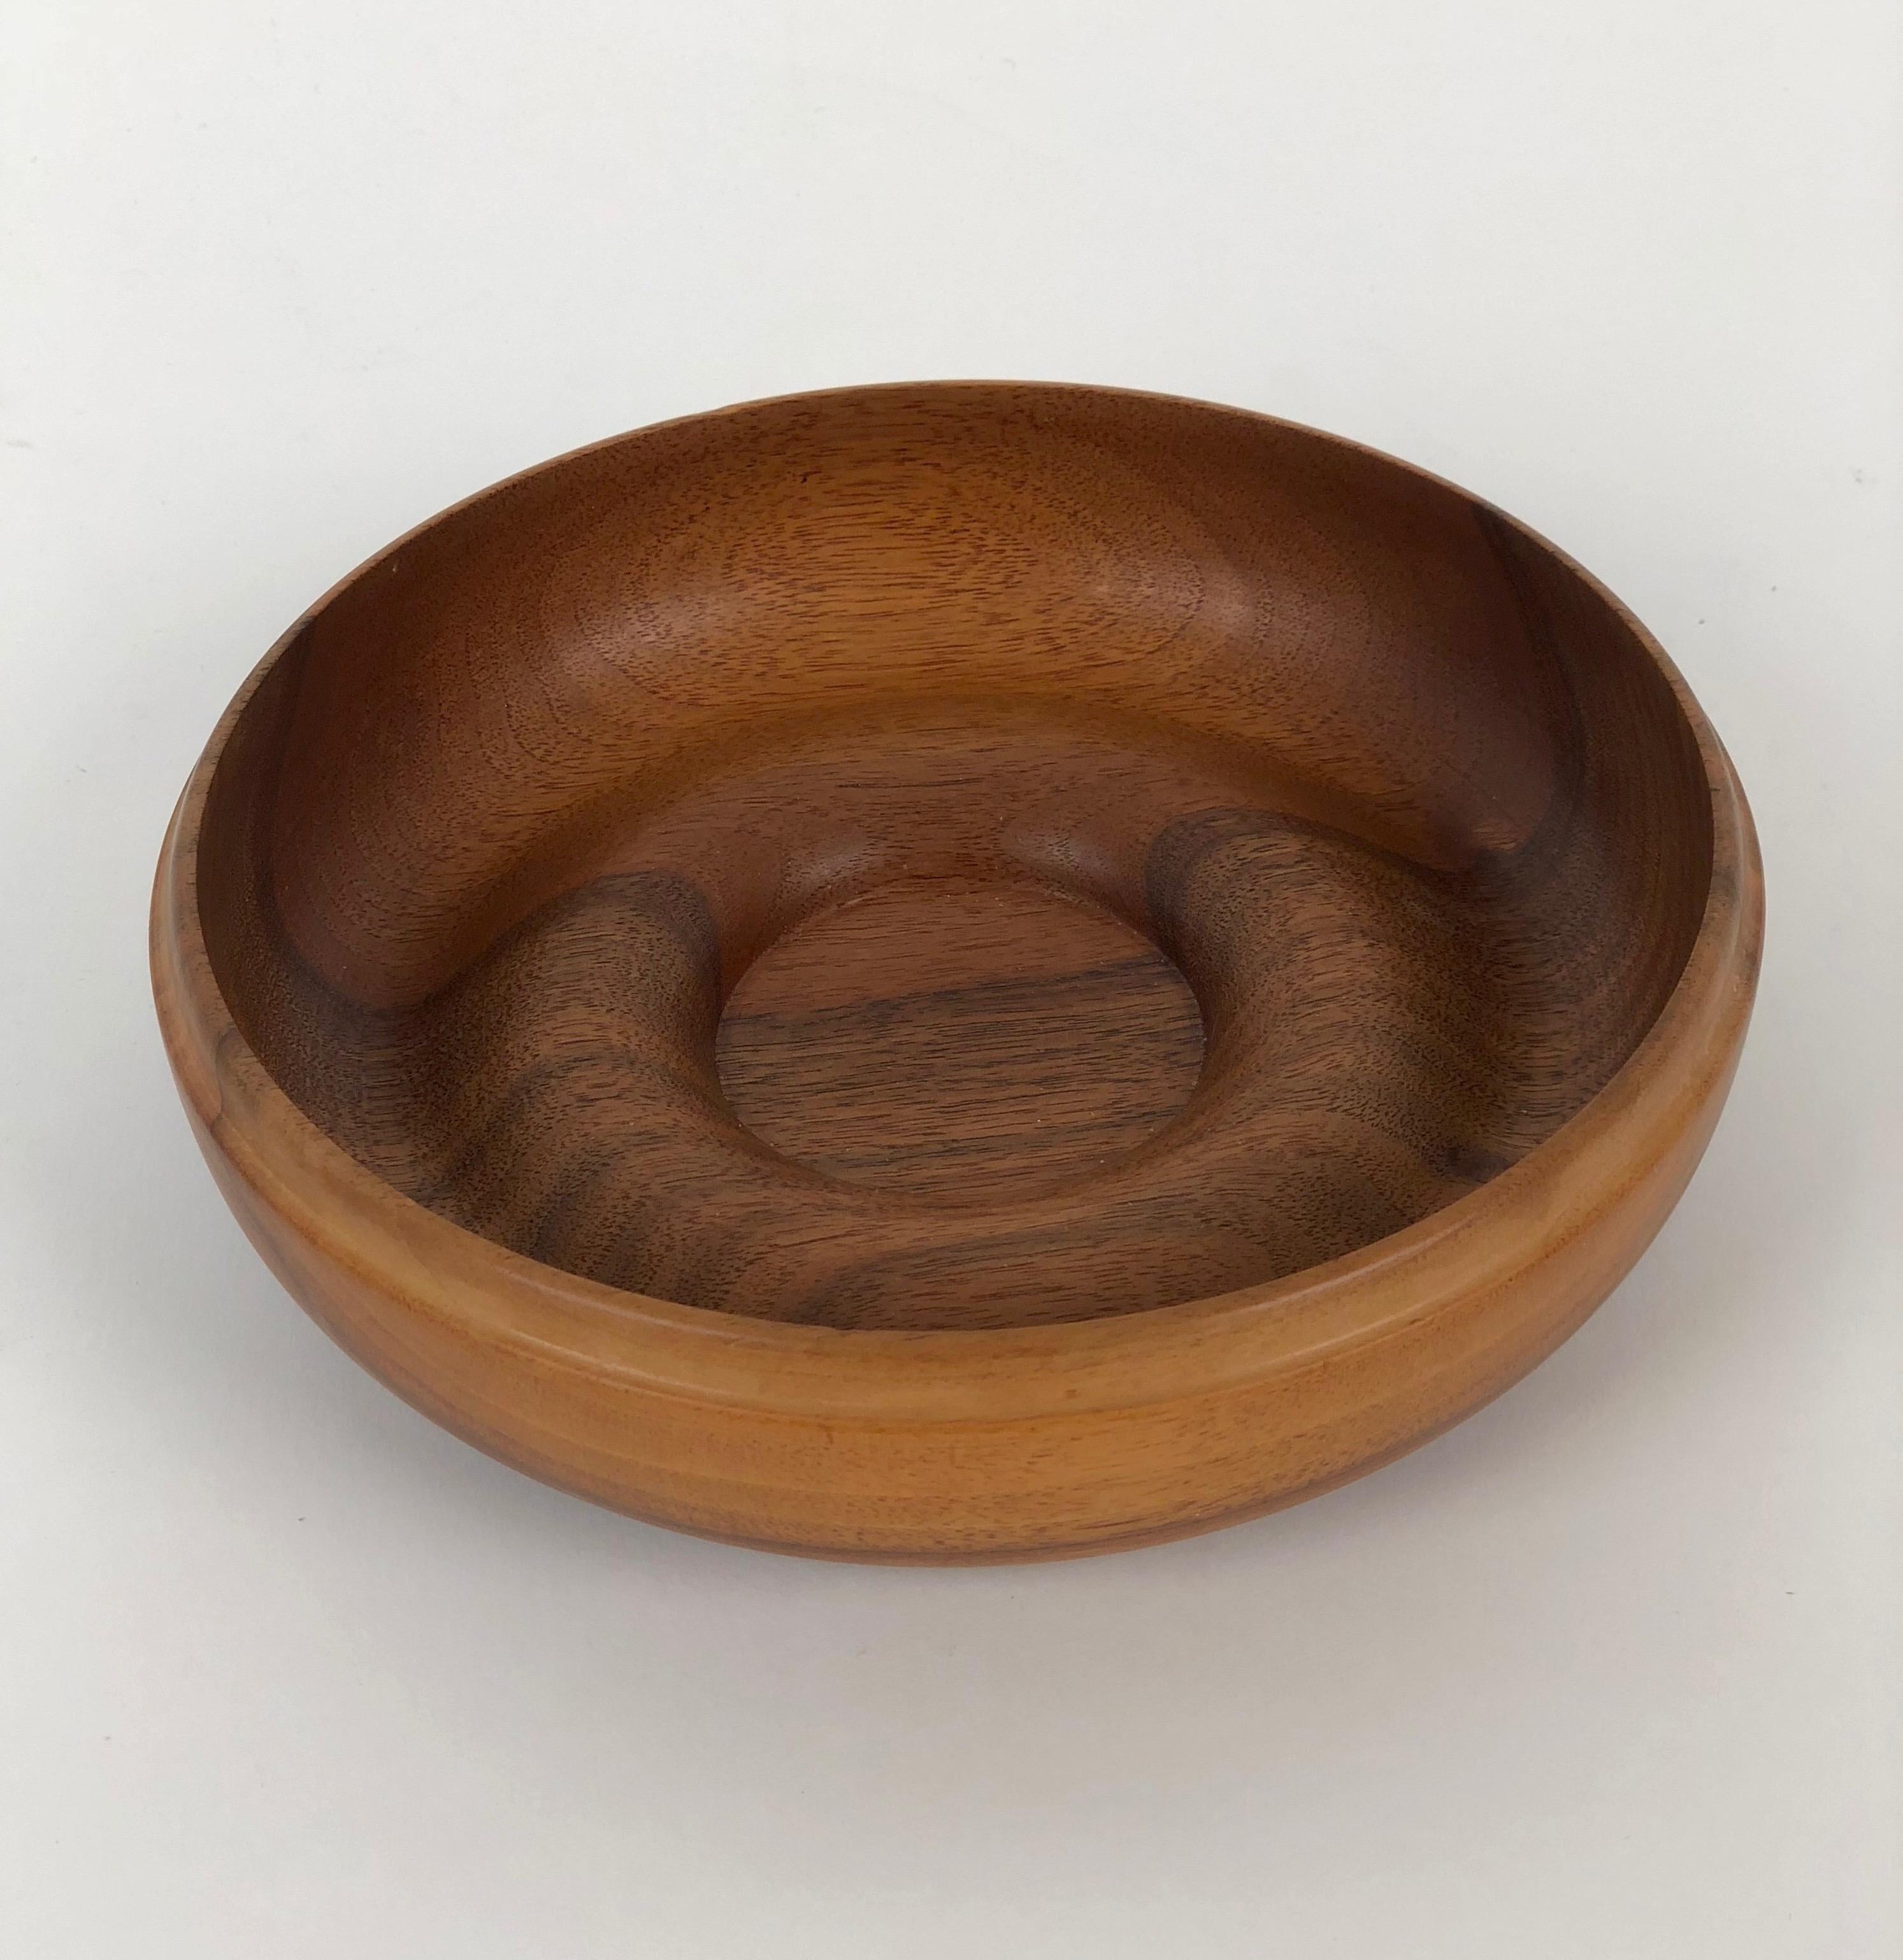 Turned Mid-Century Walnut Bowl from Scandinavia 1960's For Sale